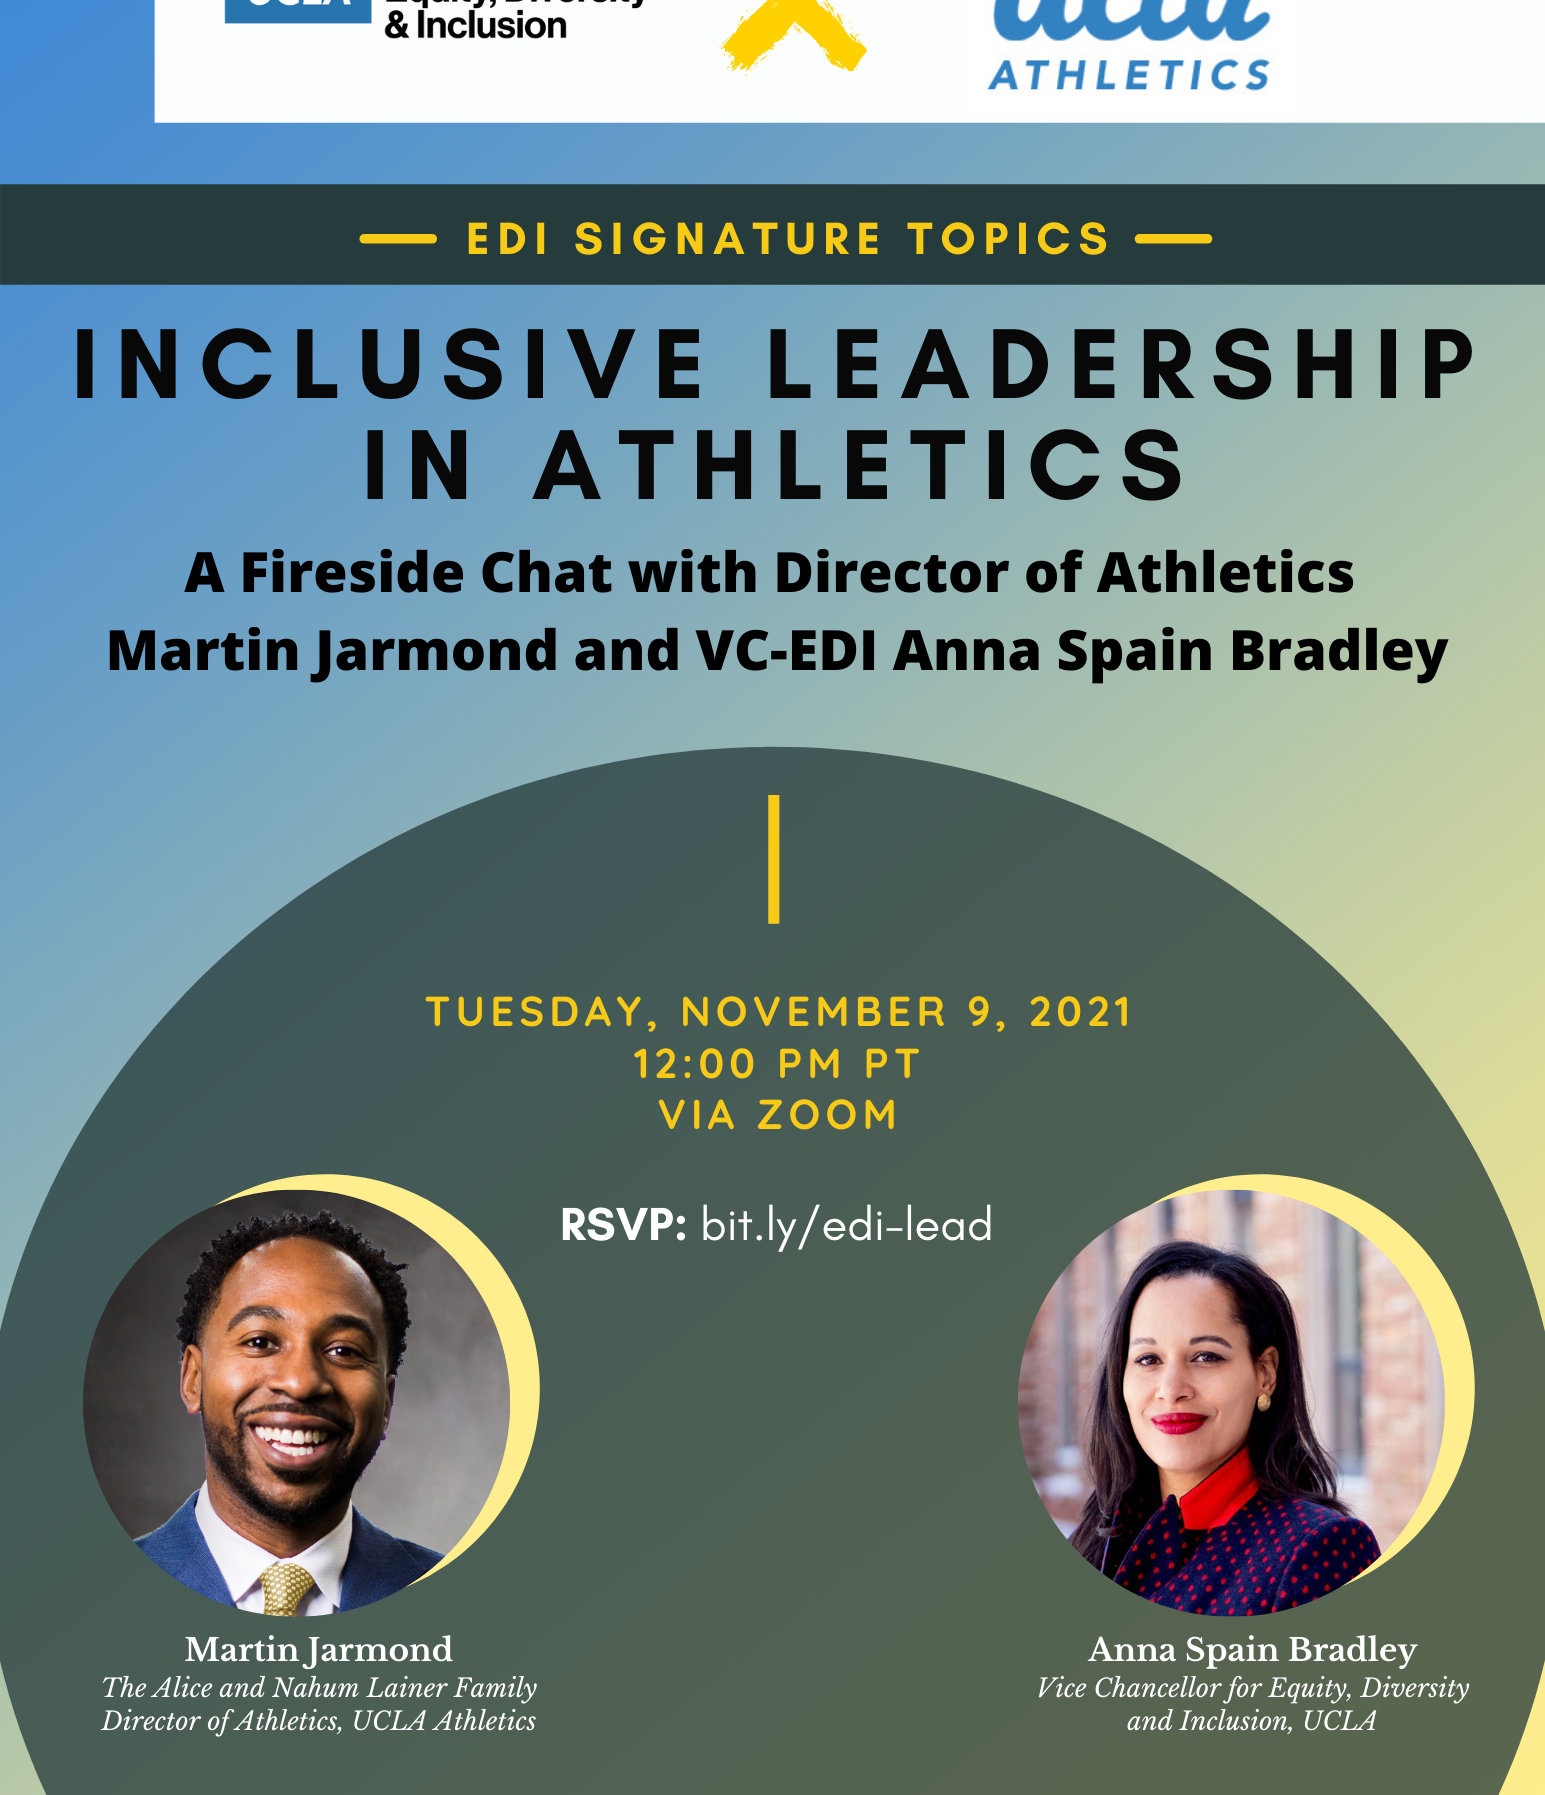 flyer for edi signature topics - inclusive leadership in sports: a fireside chat with director of athletics martin jarmond and vc-edi anna spain bradley